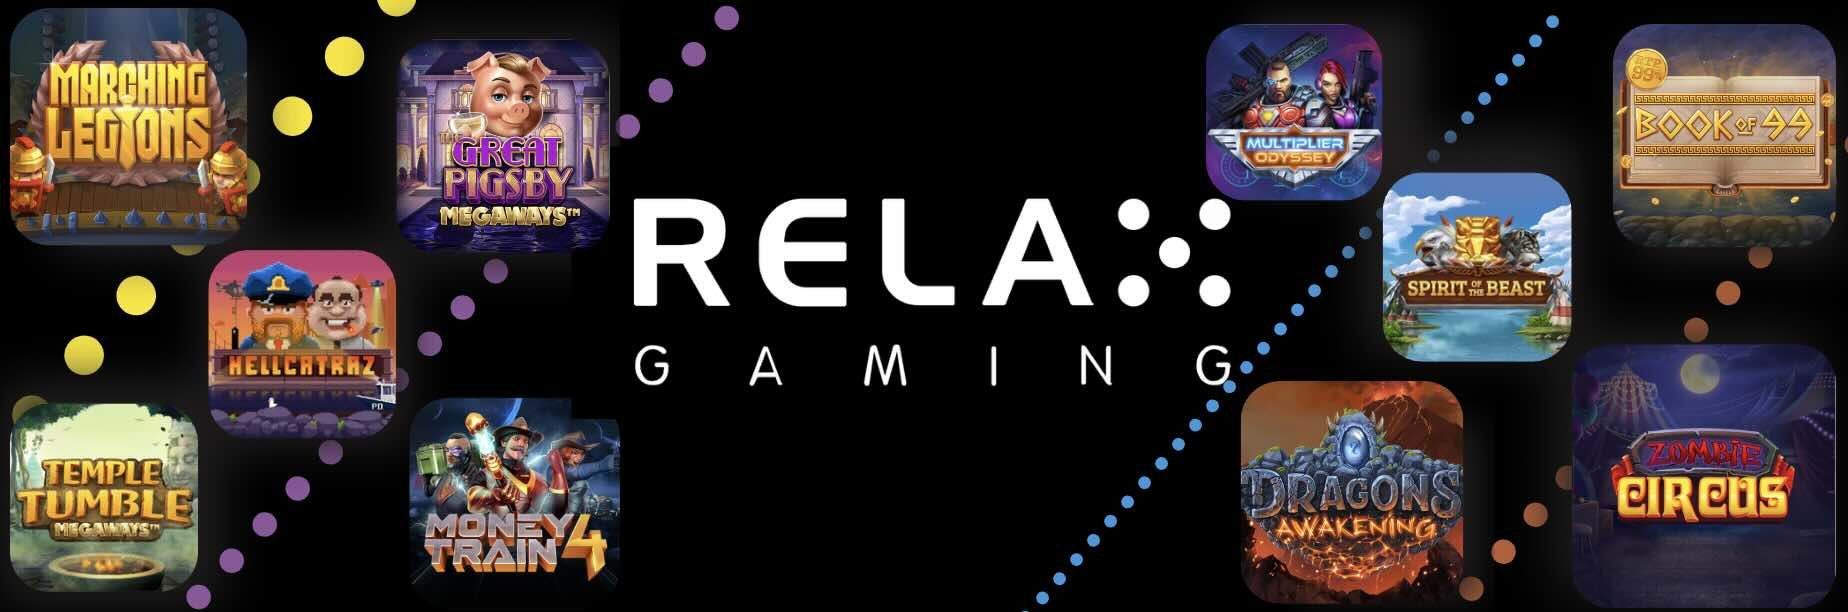 Image of Top 10 best Relax Gaming slots